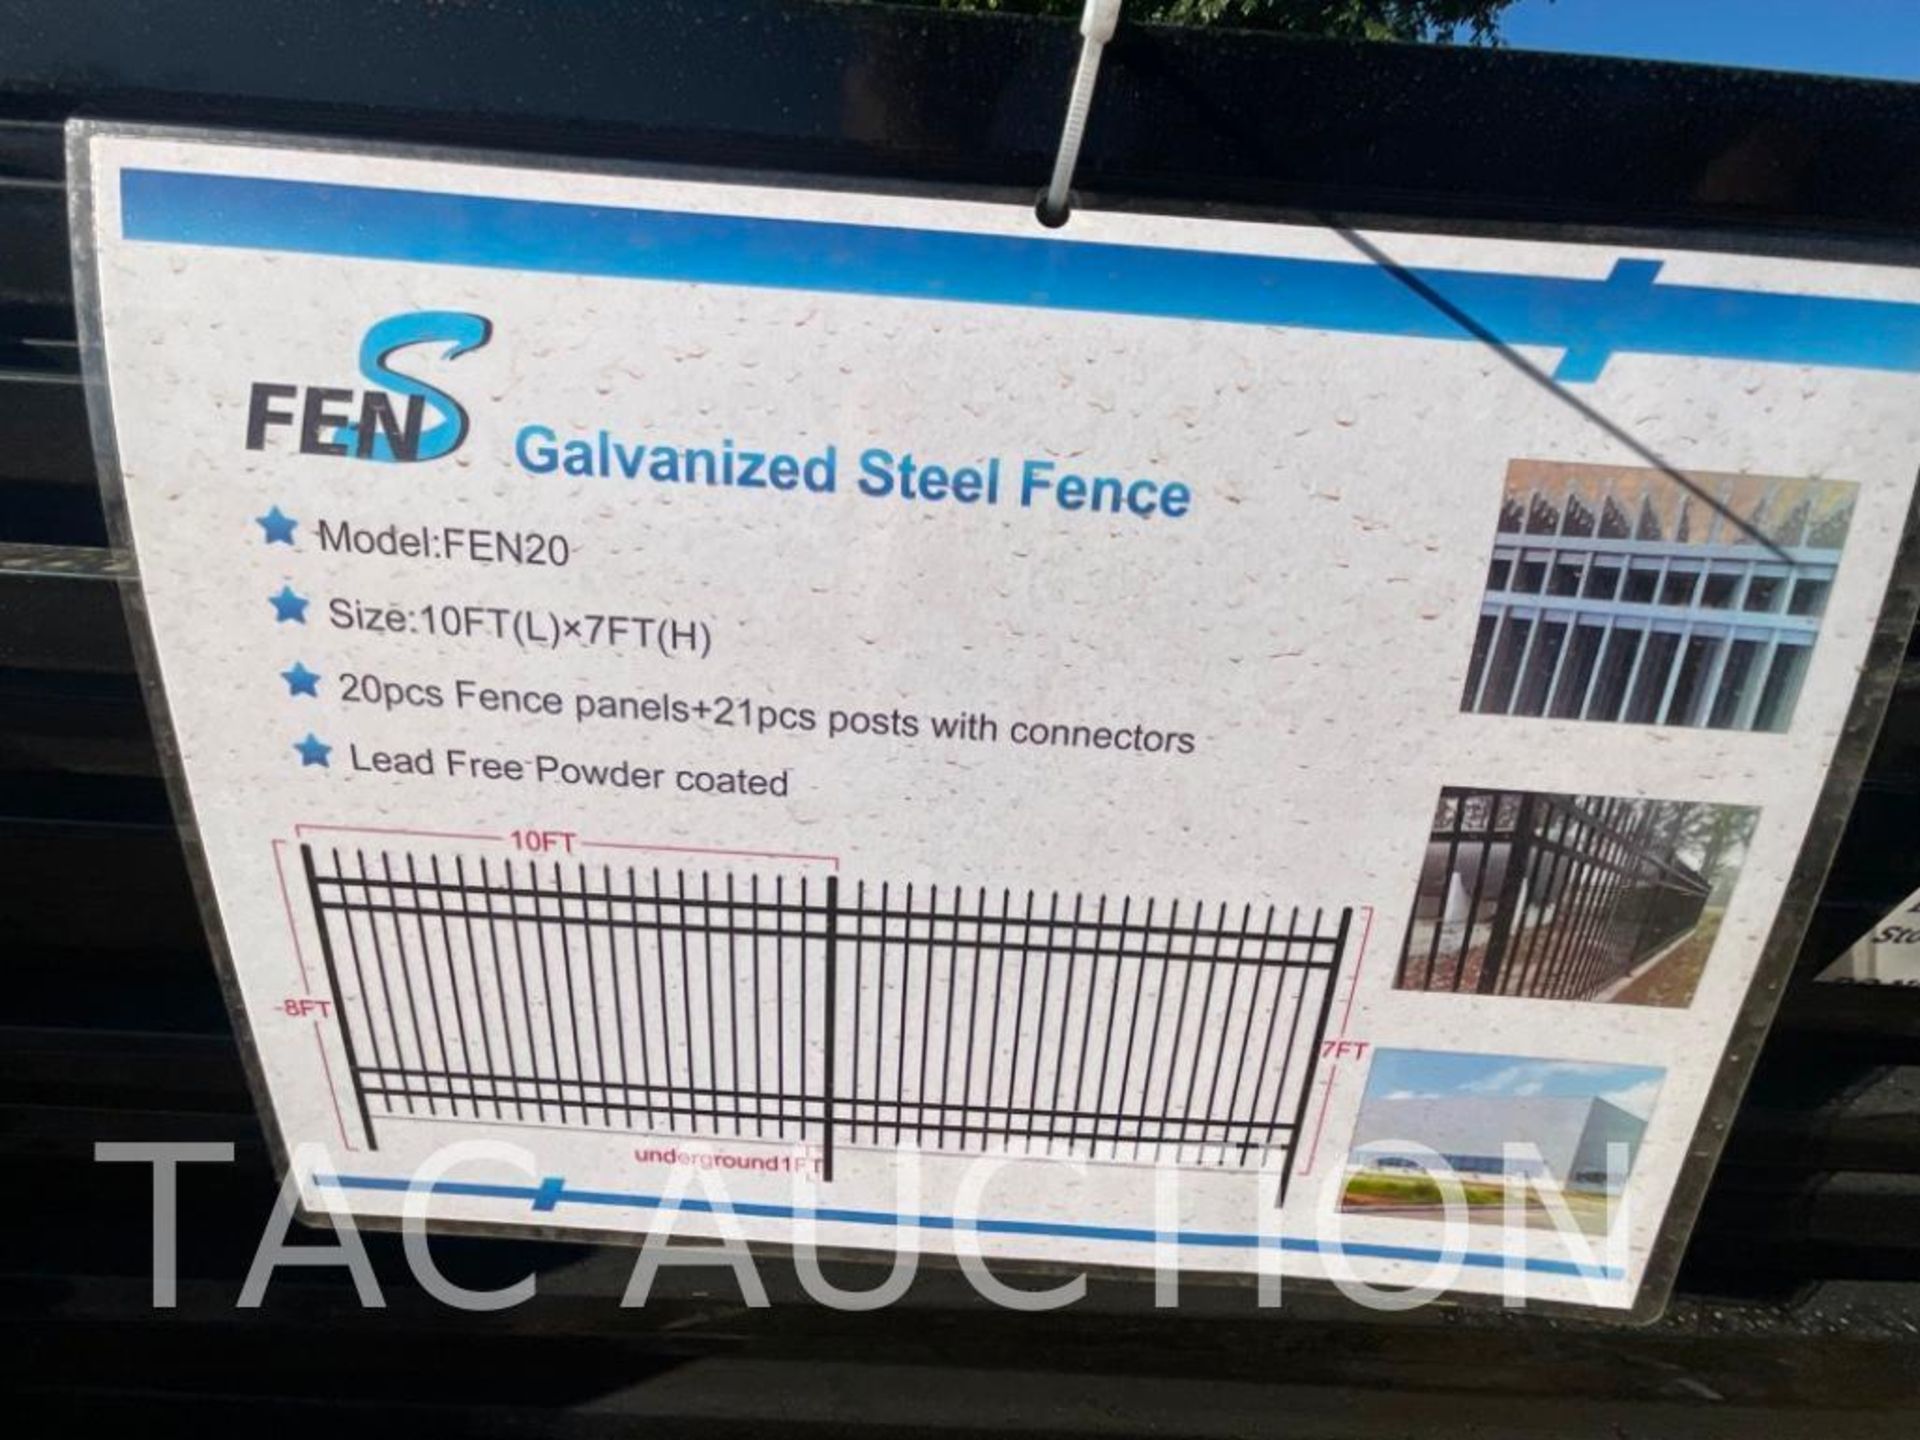 New Powder Coated Galvanized Steel Fencing - Image 3 of 4